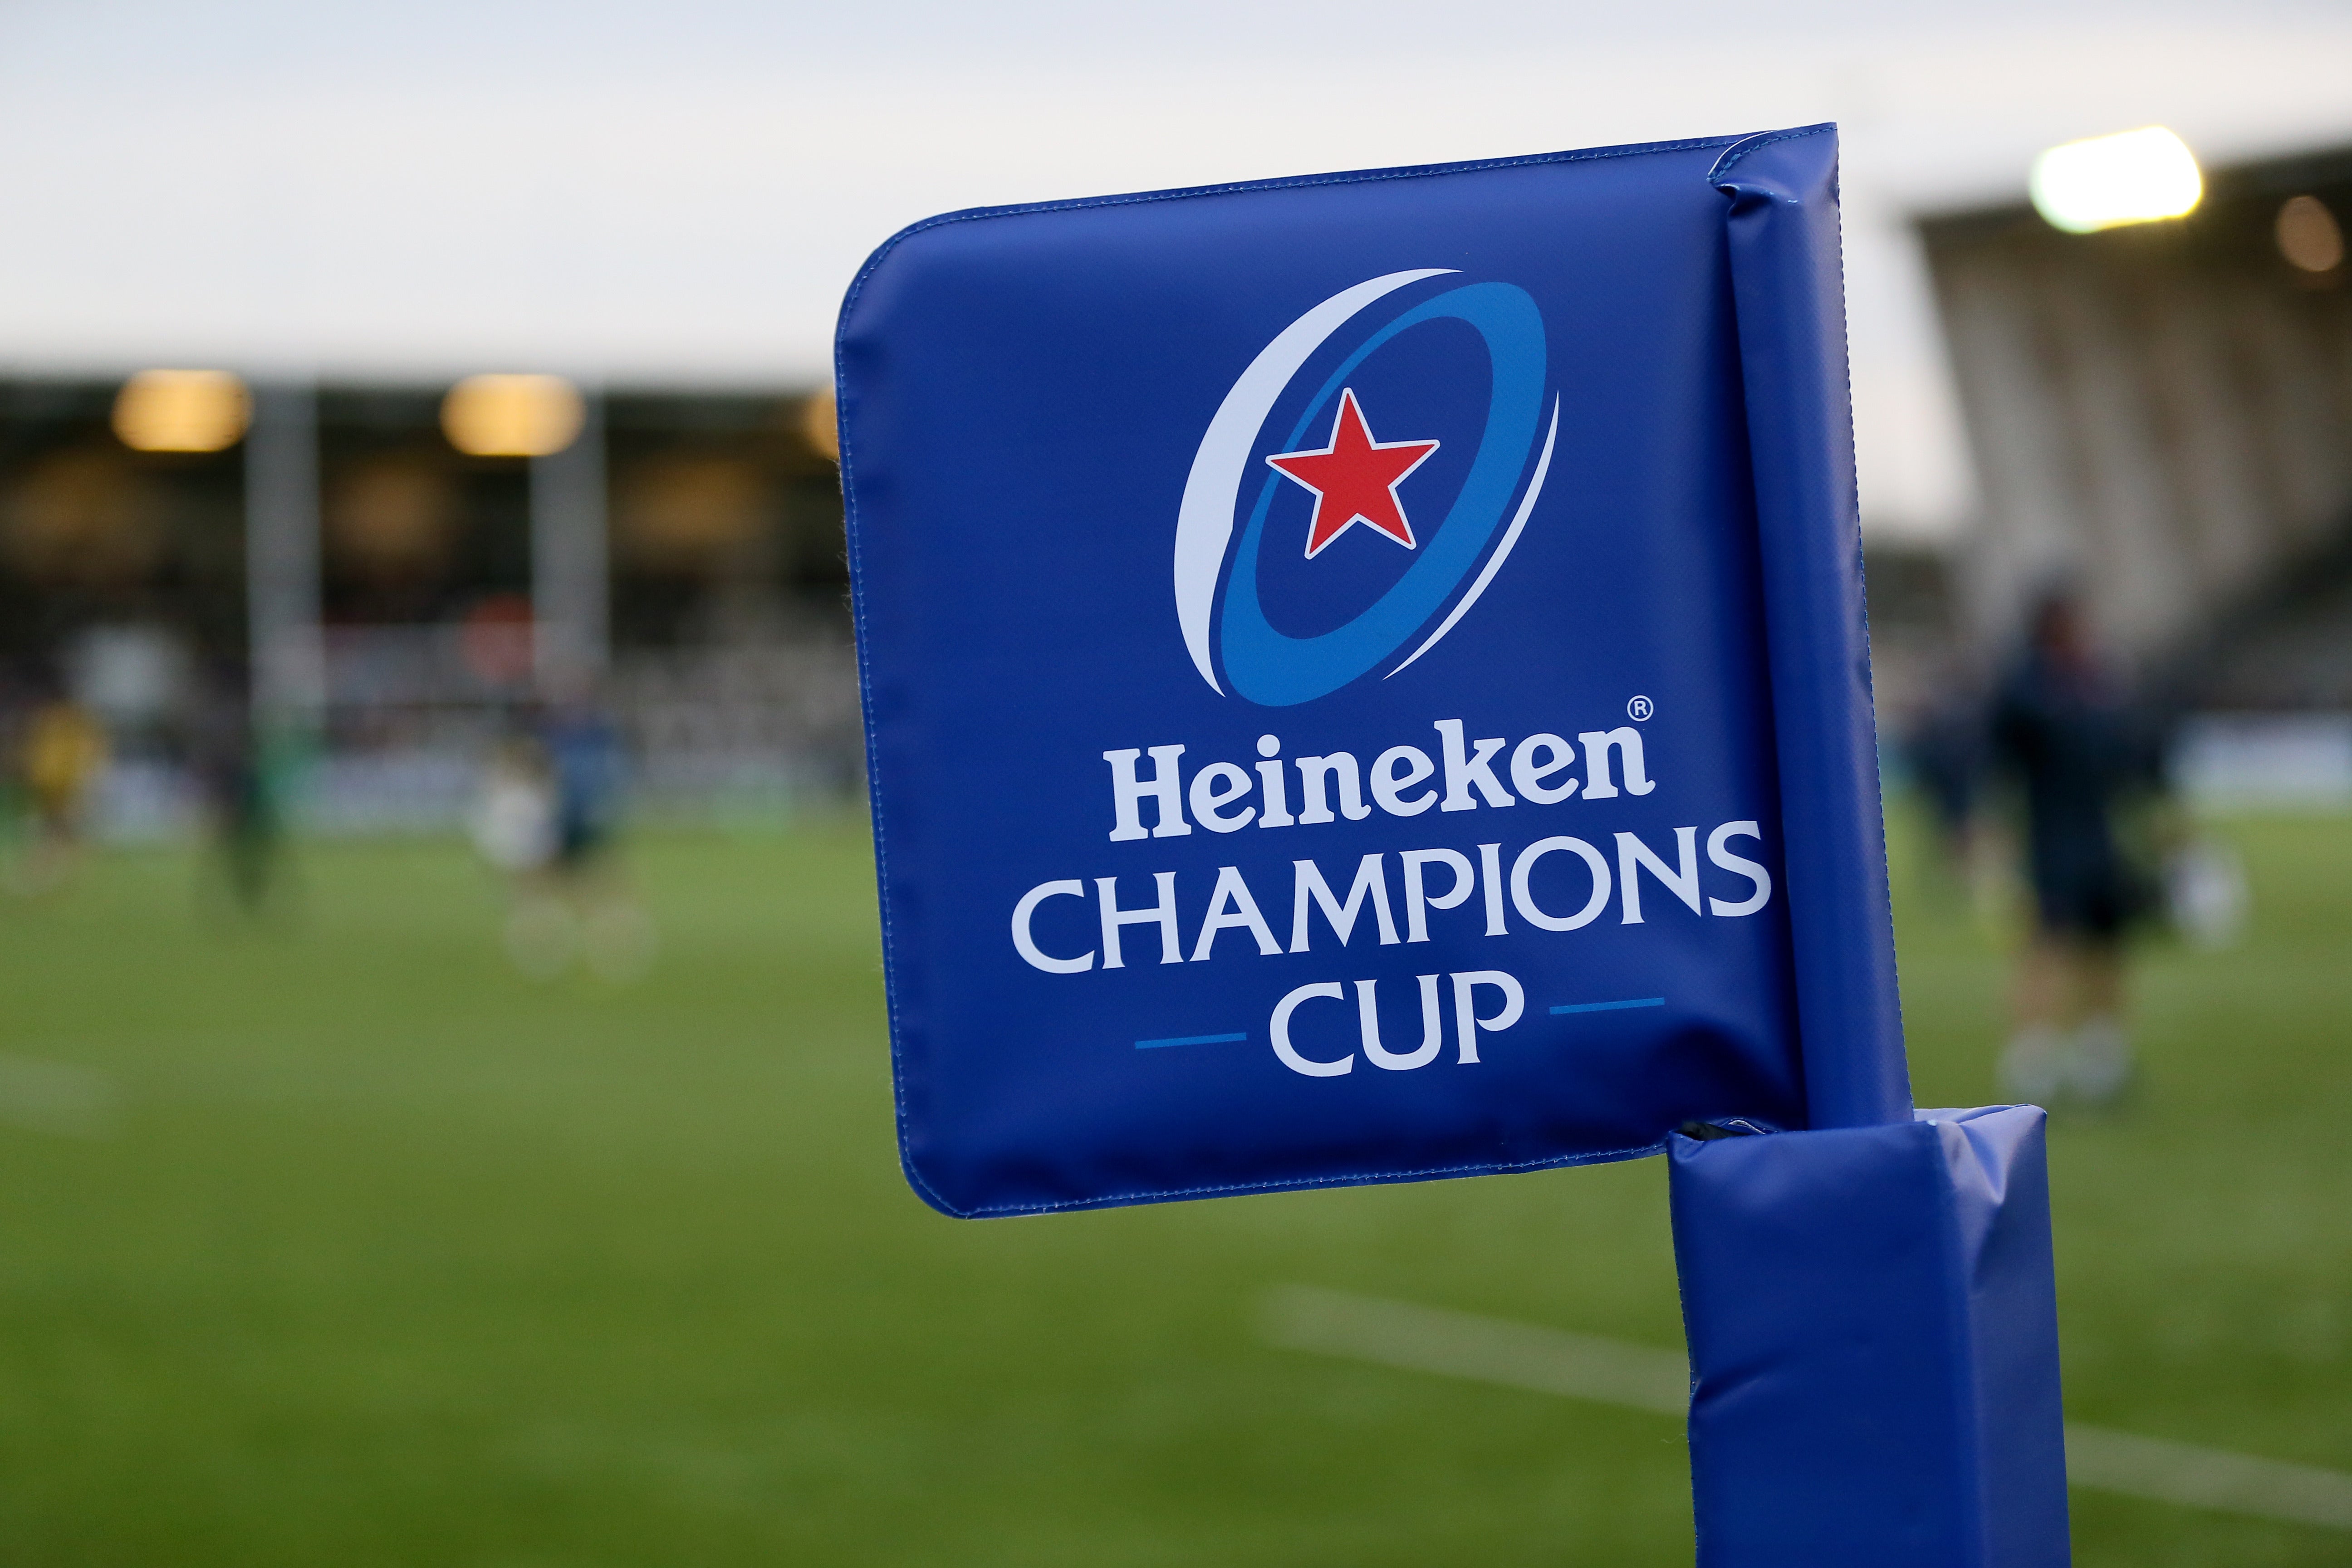 Northampton’s Heineken Champions Cup match against Racing 92 has been cancelled (Richard Sellers/PA)